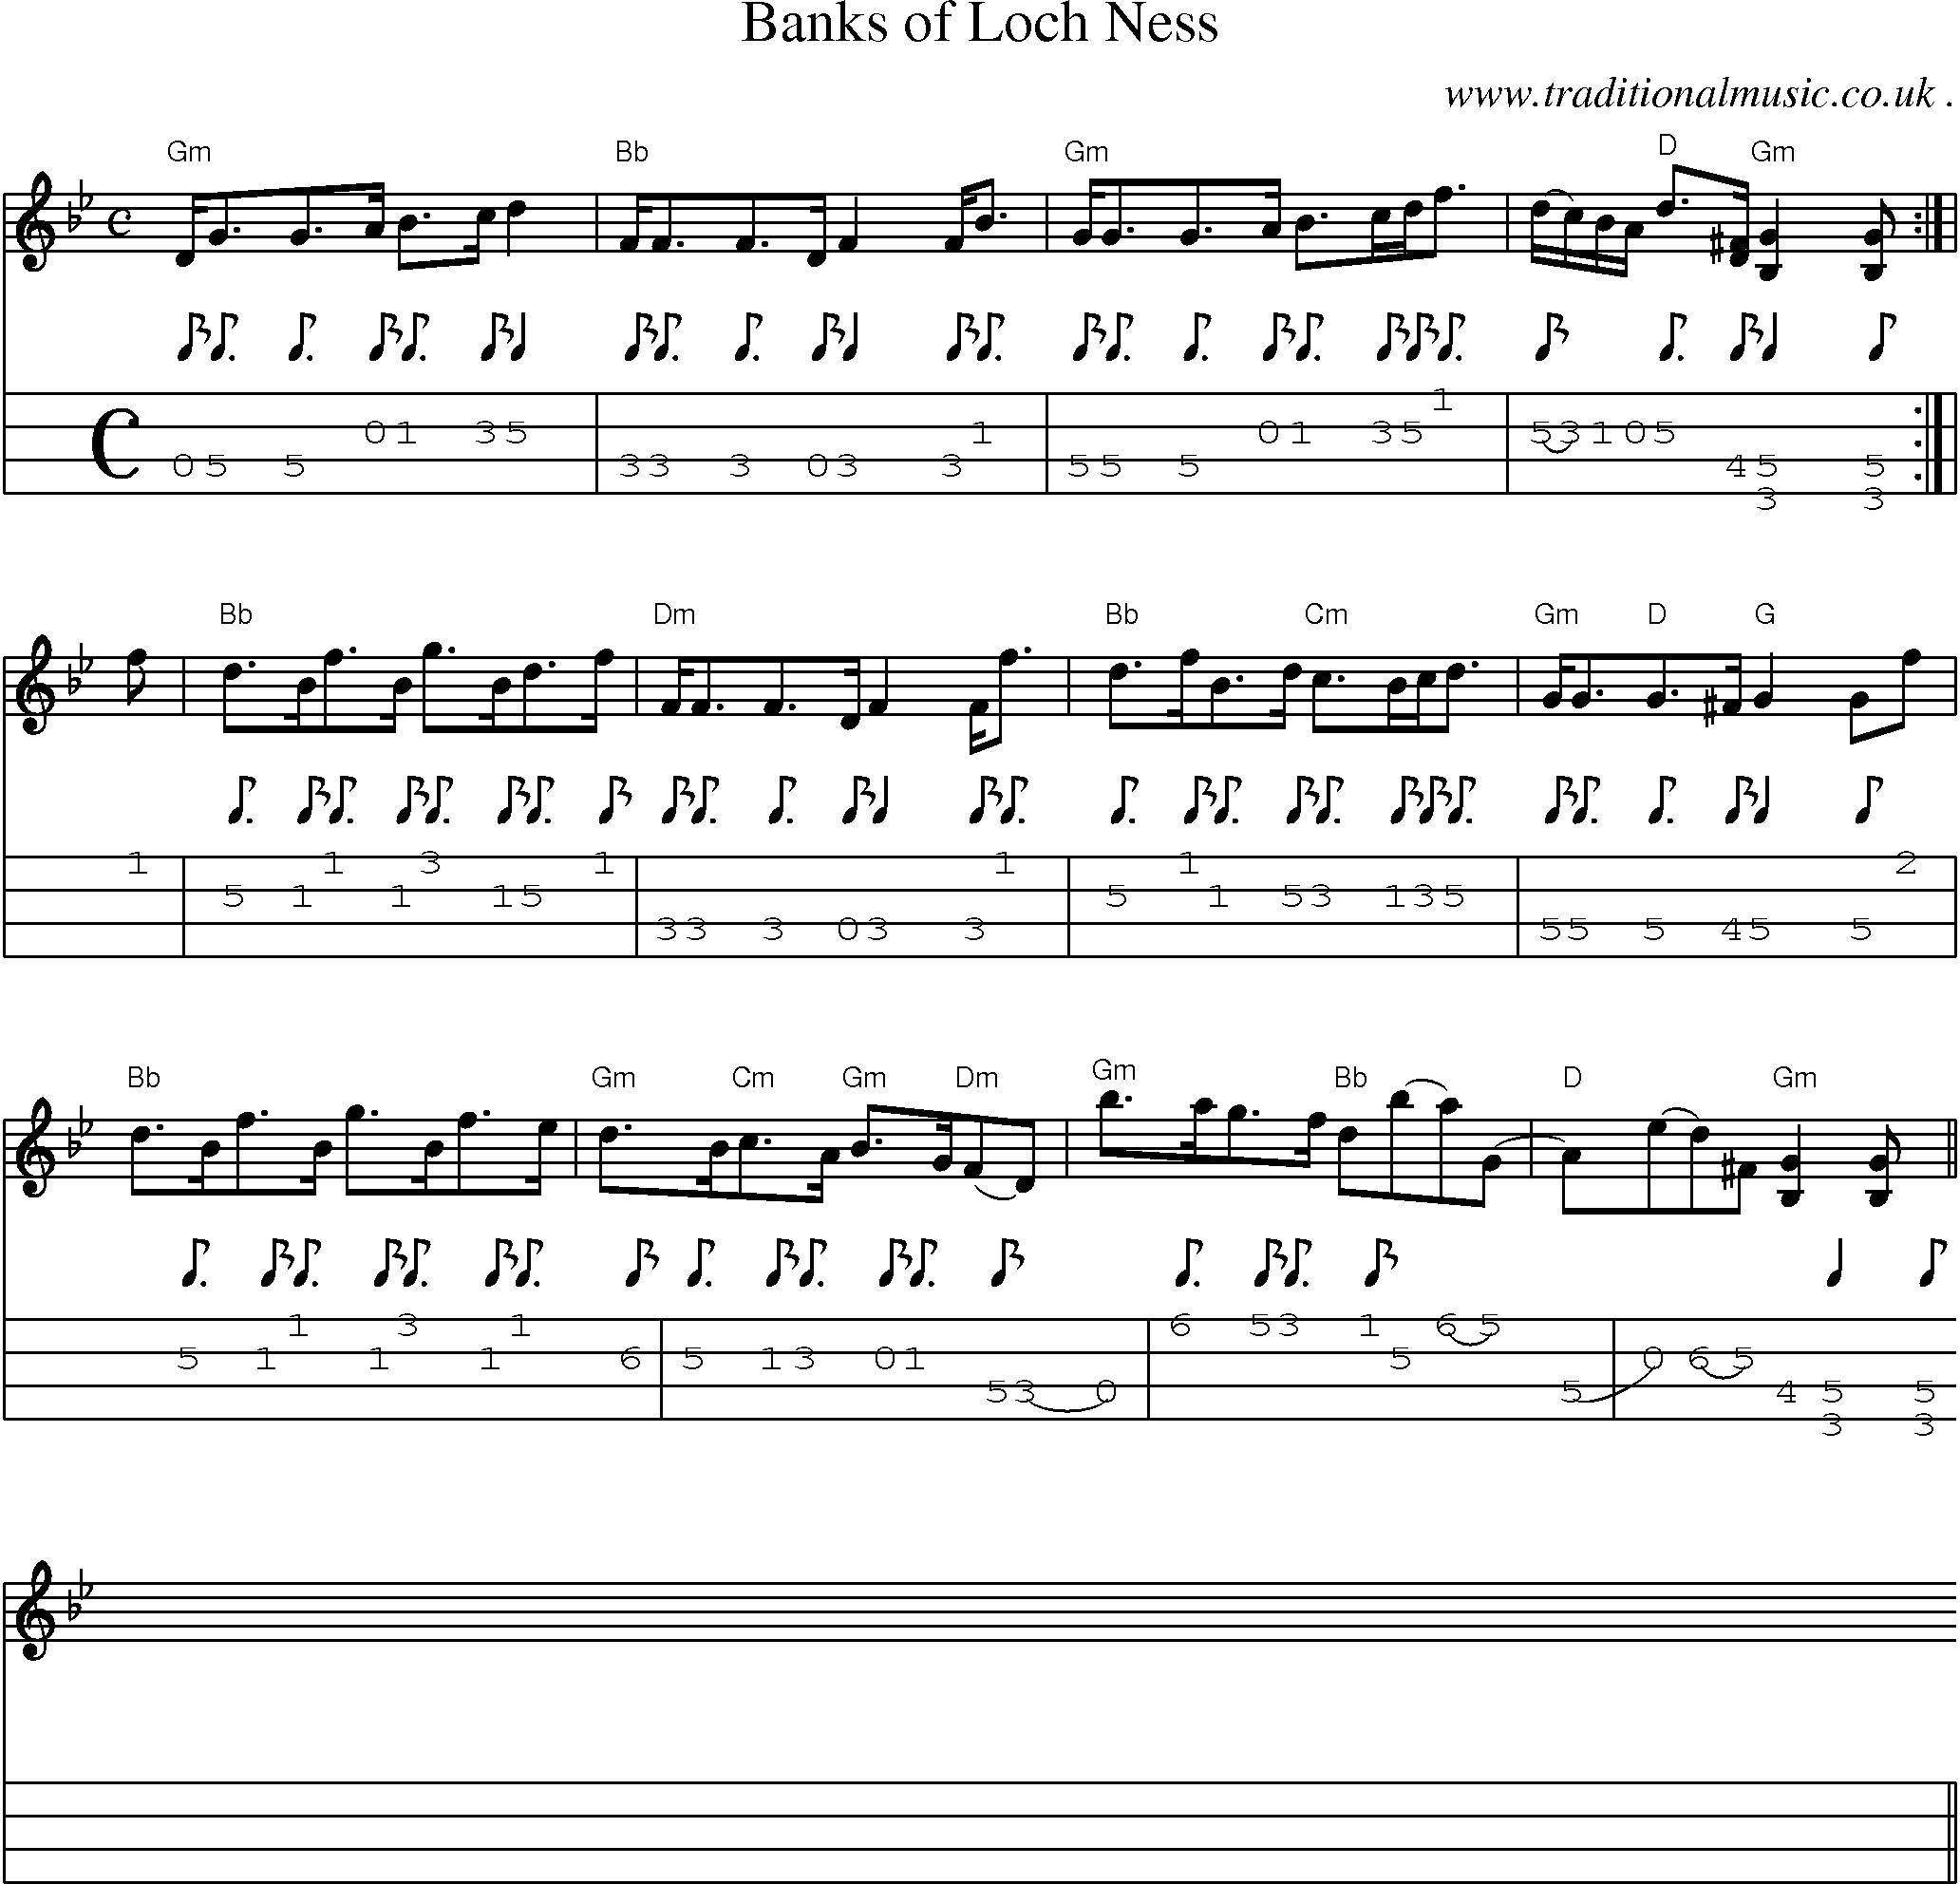 Sheet-music  score, Chords and Mandolin Tabs for Banks Of Loch Ness